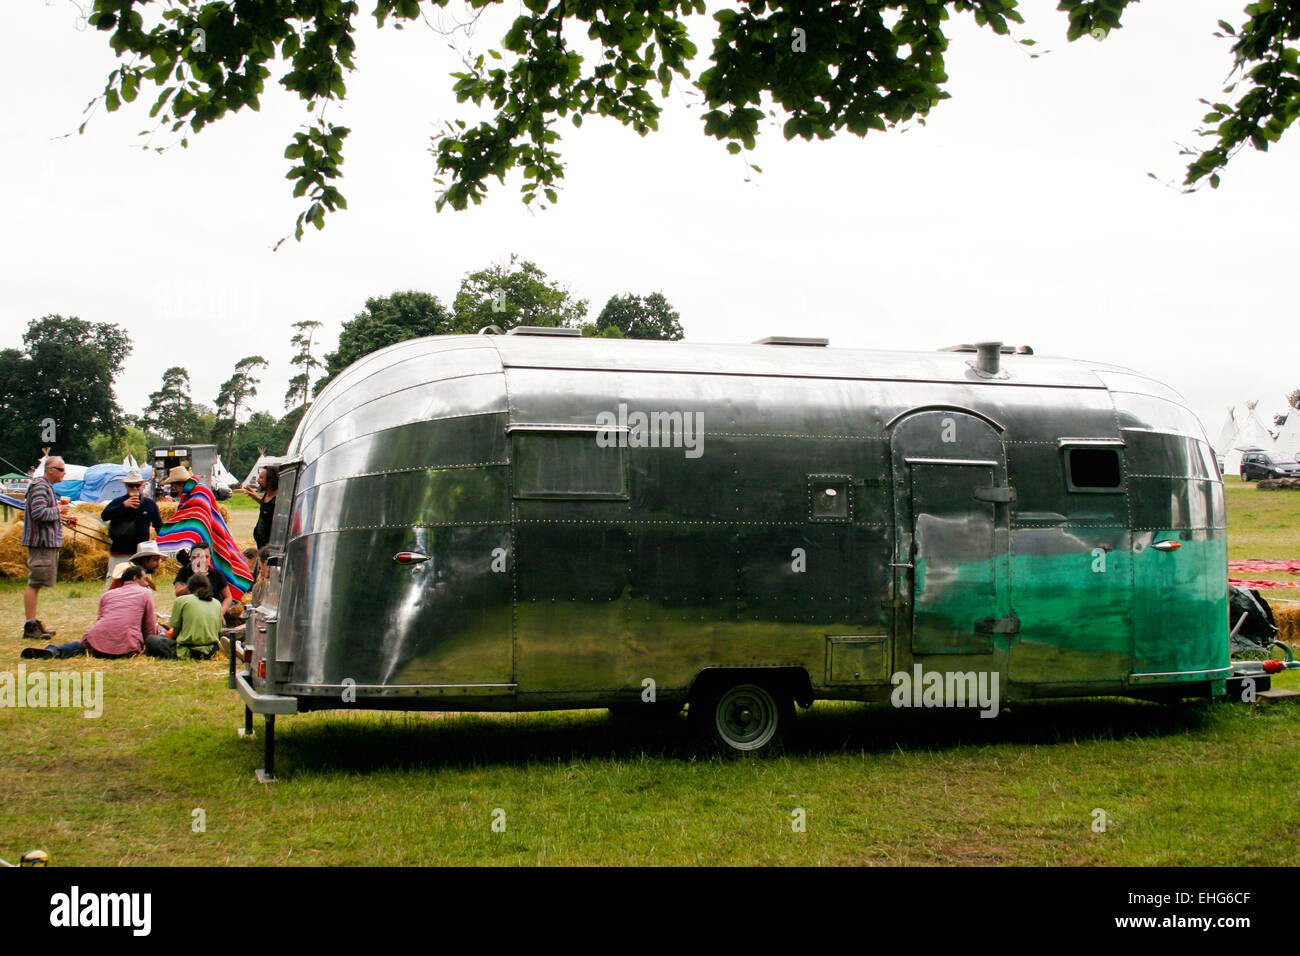 Iconic Airstream 'silver bullet' travel trailers at a festival in England. Stock Photo